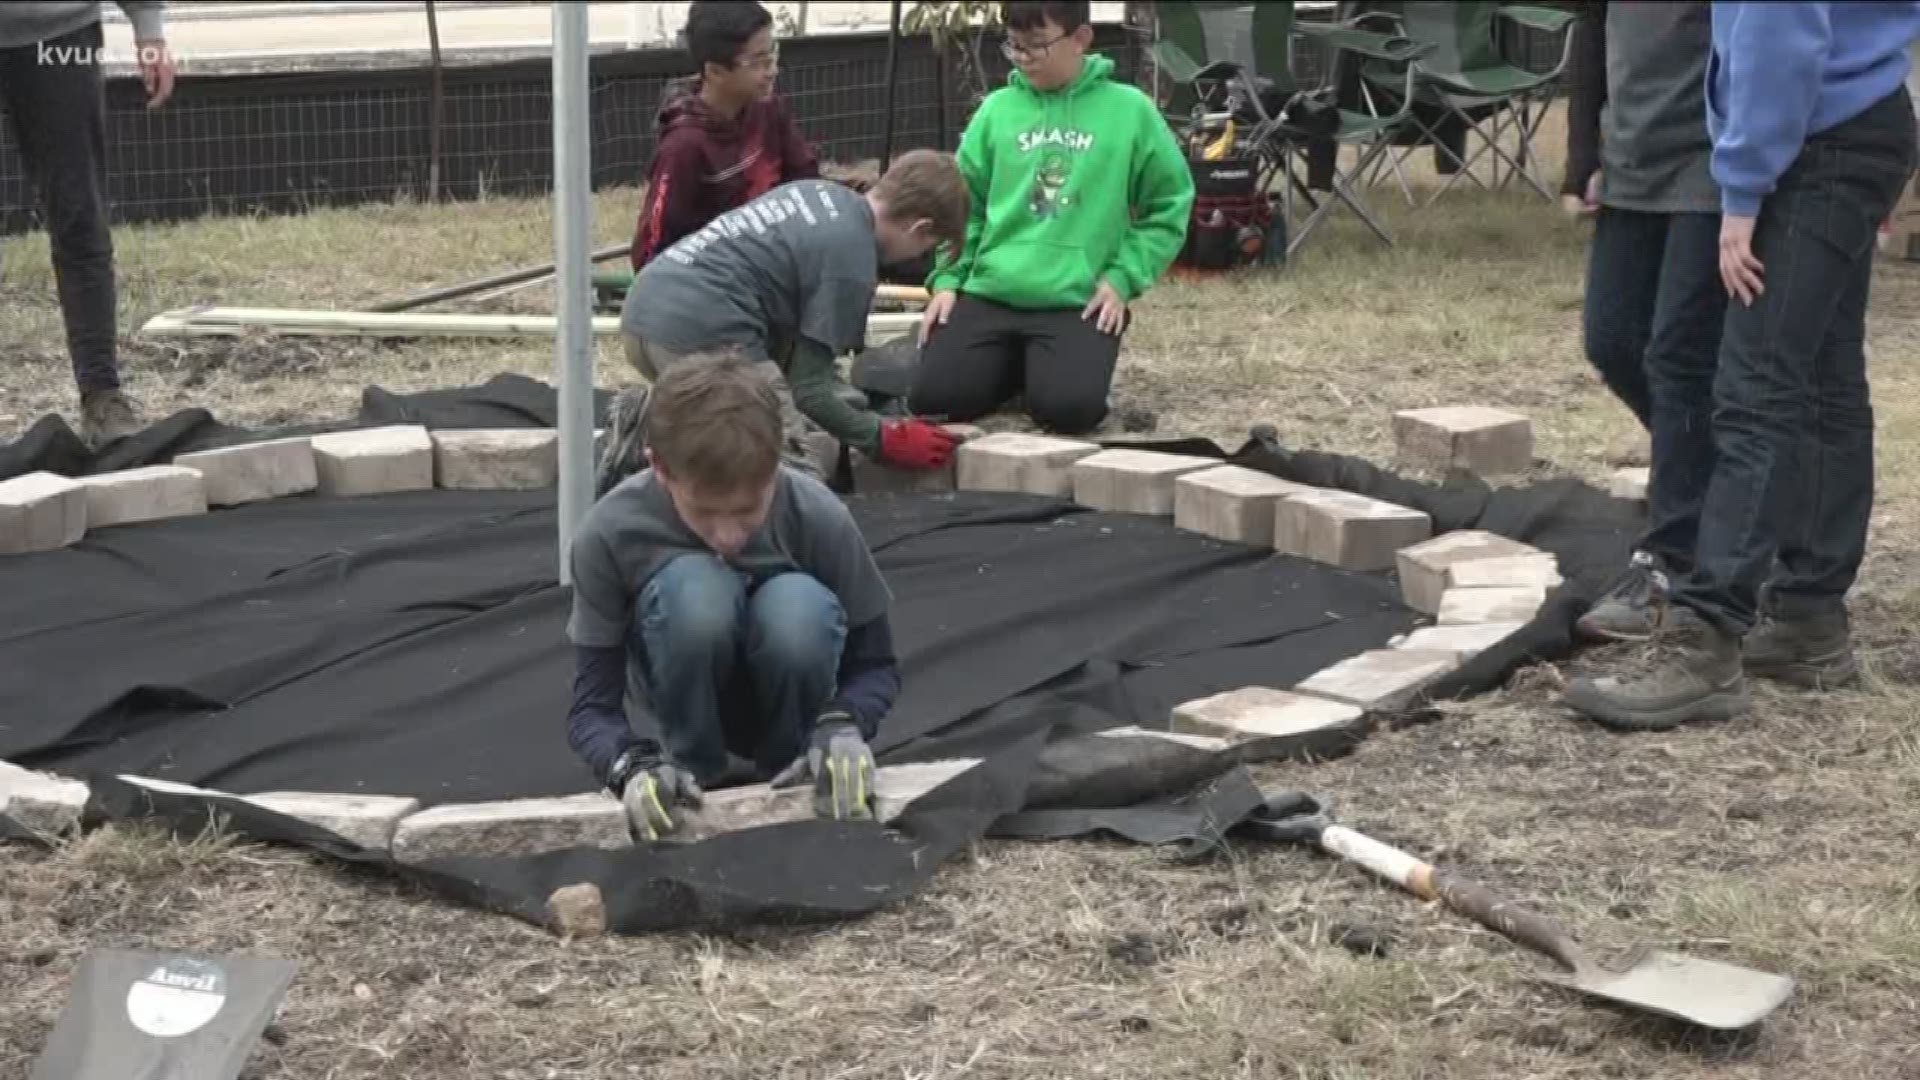 Kalyn Norwood shows us how a group of Boy Scouts used their skills to make a difference.